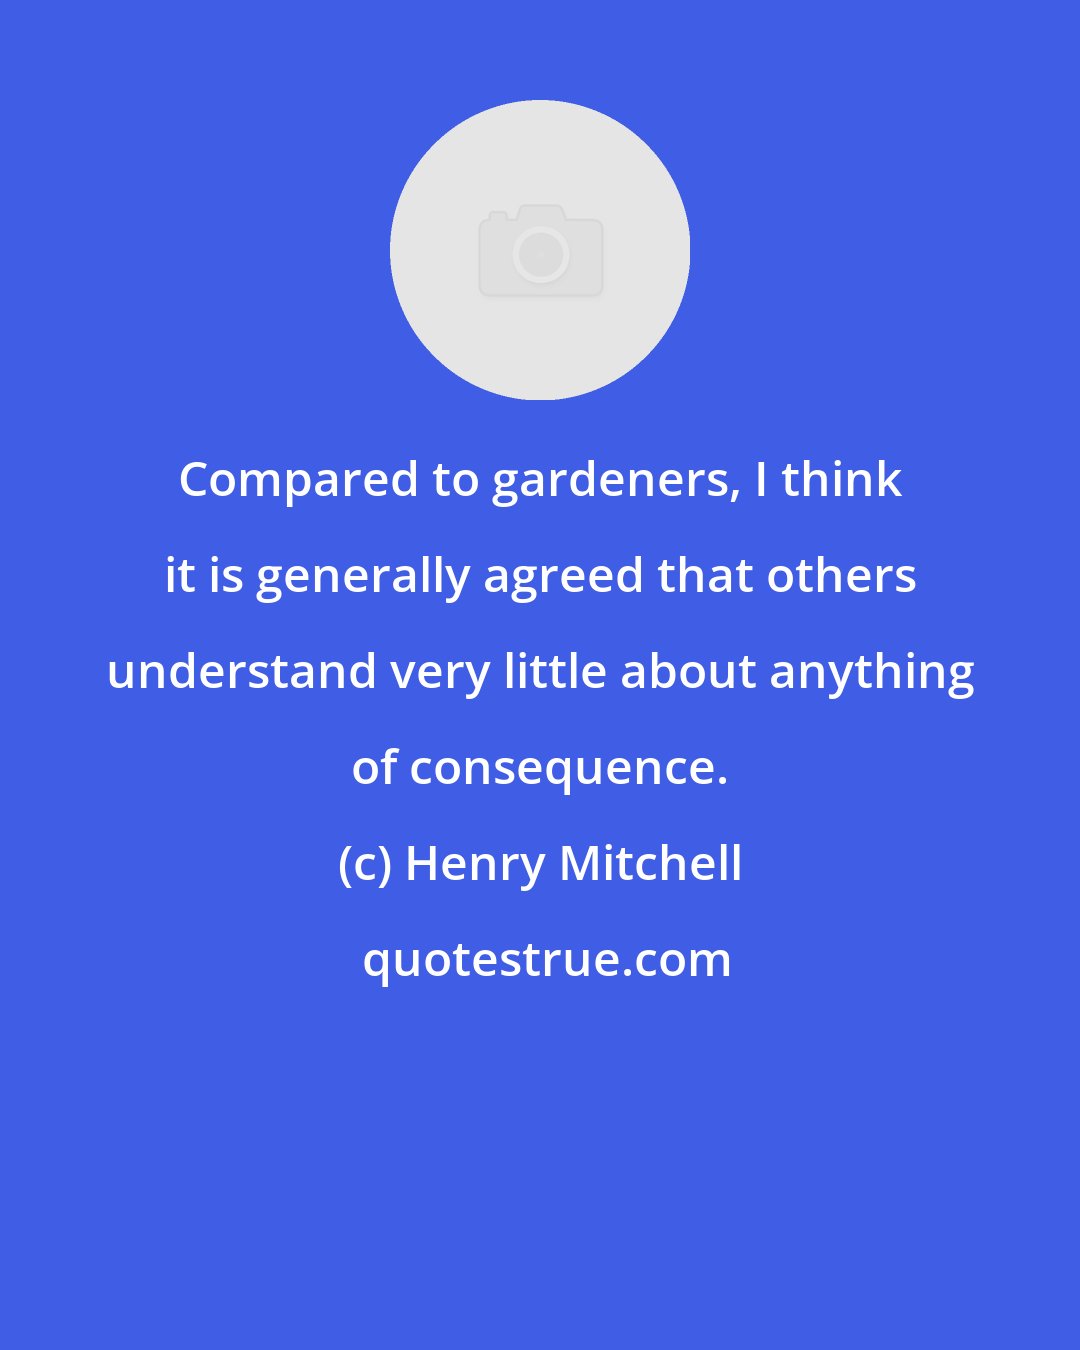 Henry Mitchell: Compared to gardeners, I think it is generally agreed that others understand very little about anything of consequence.